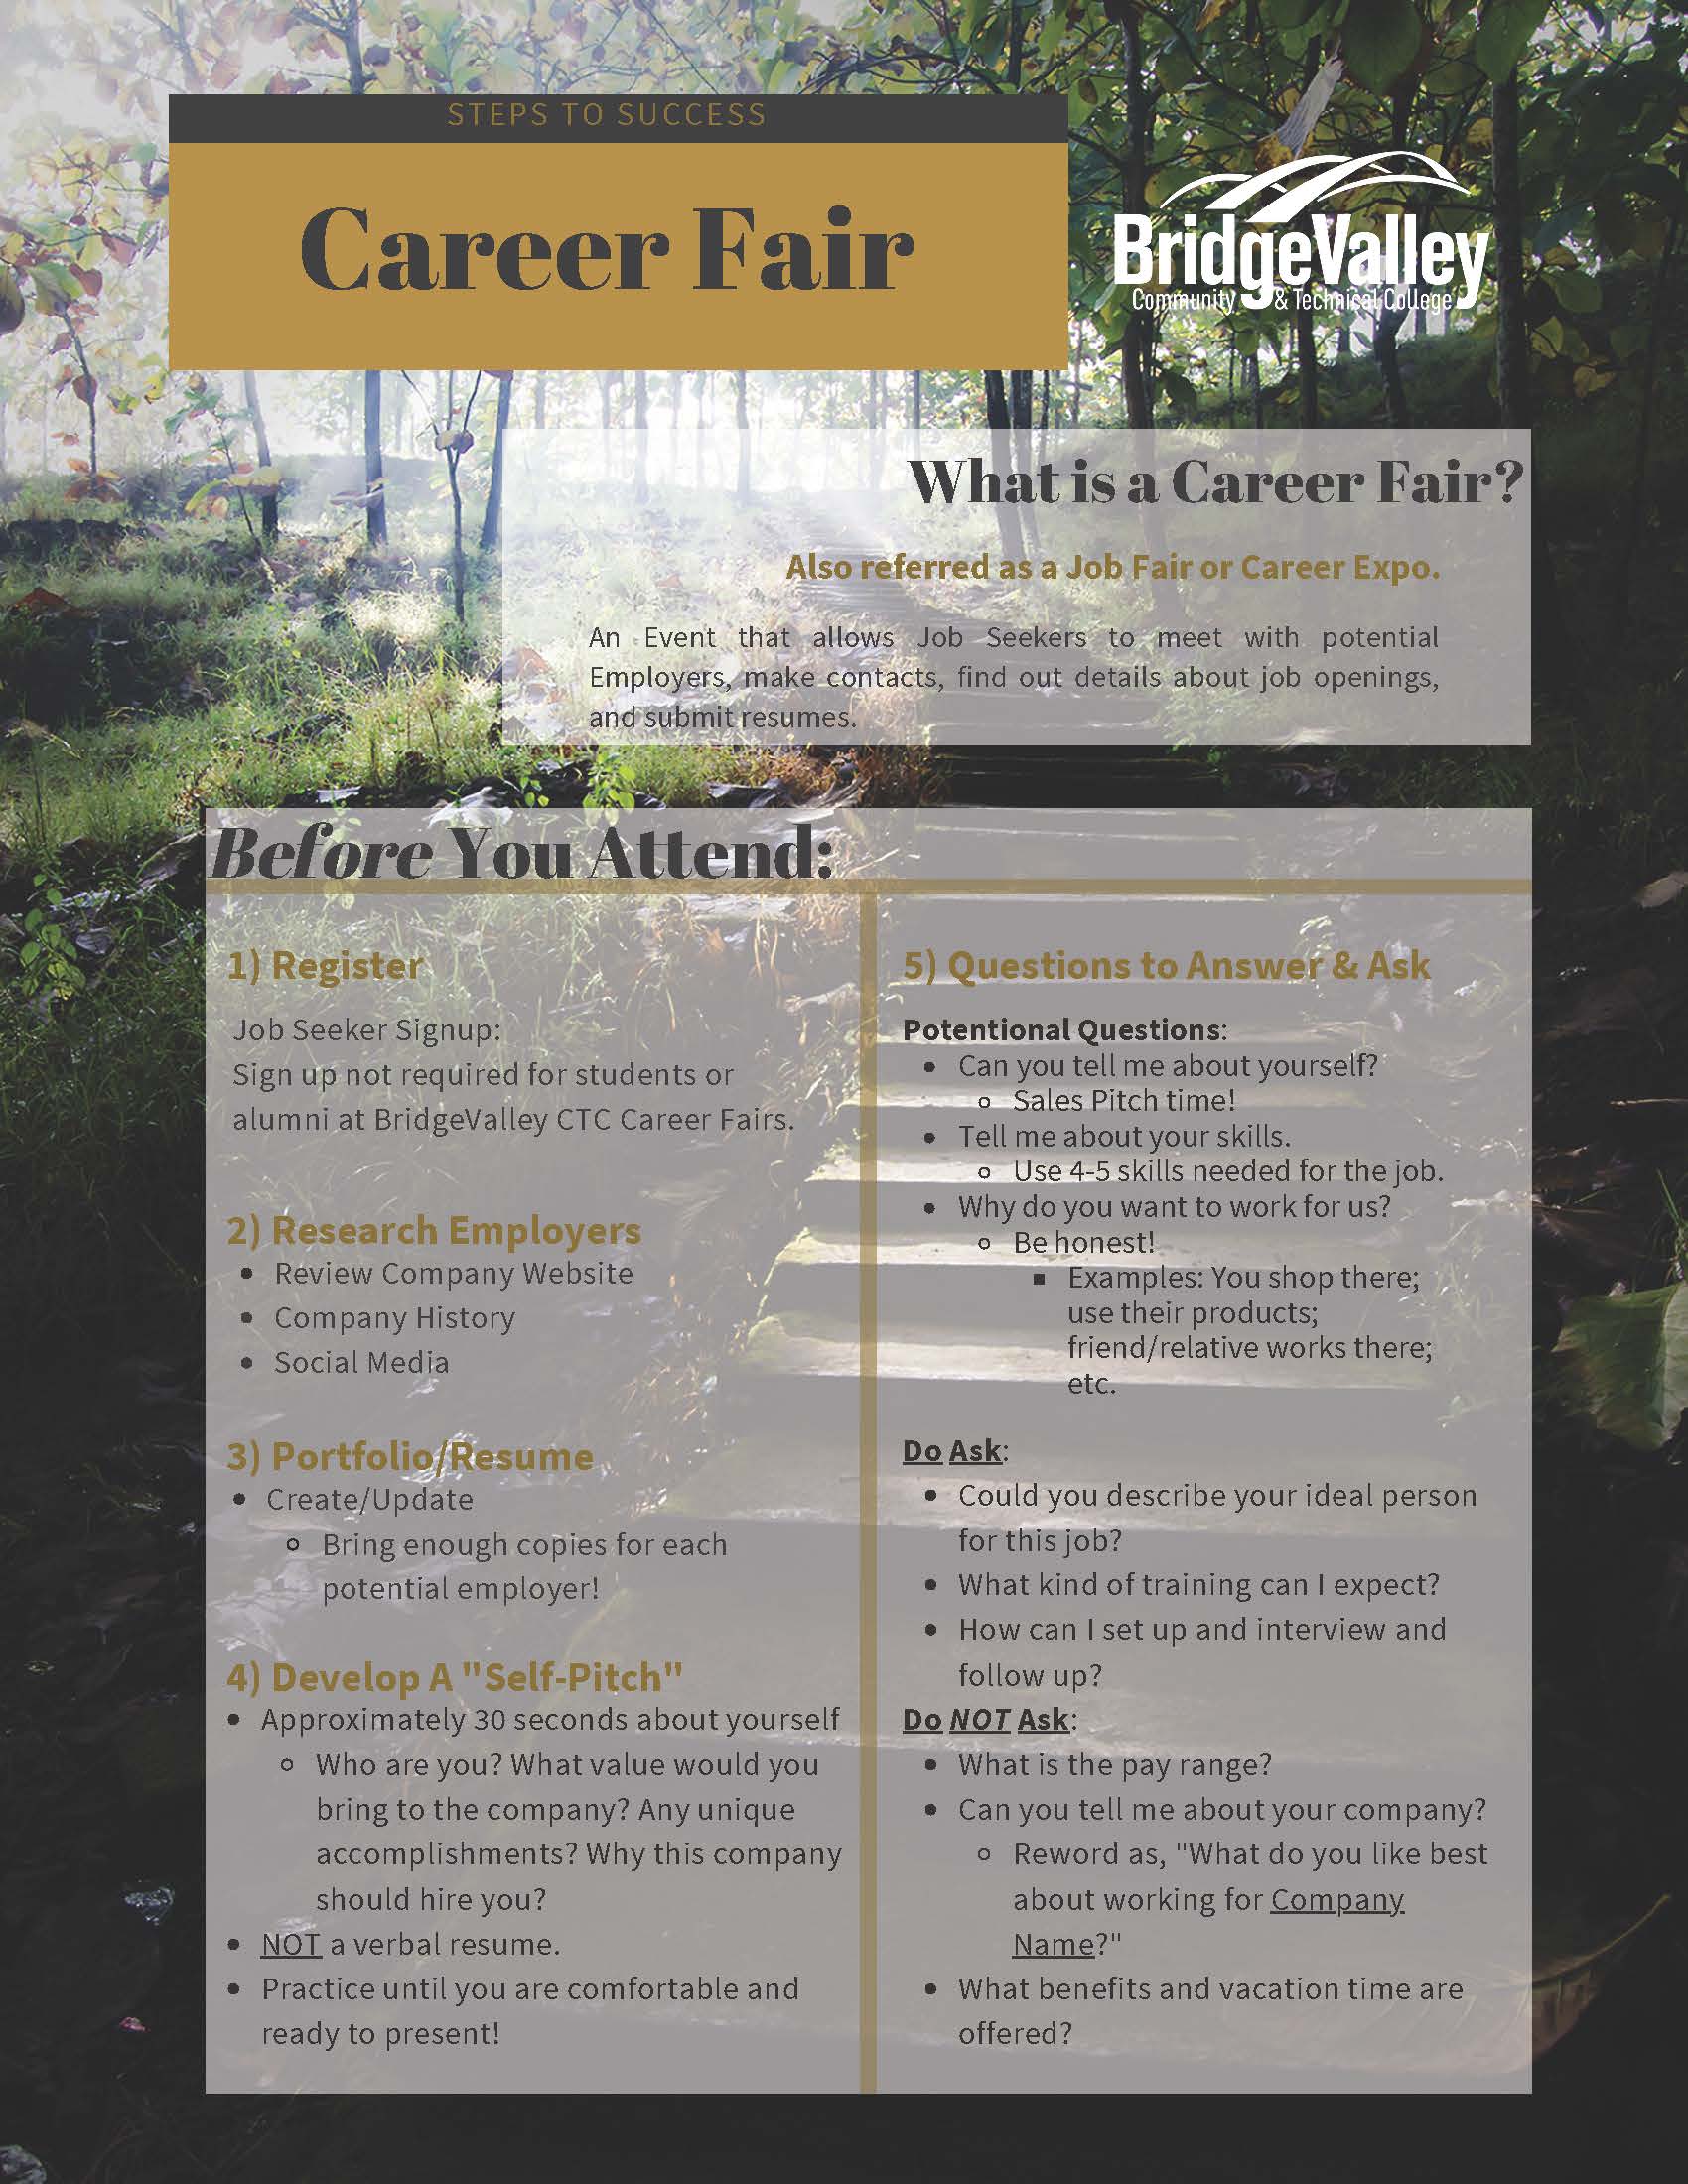 Steps to Success - Career Fairs